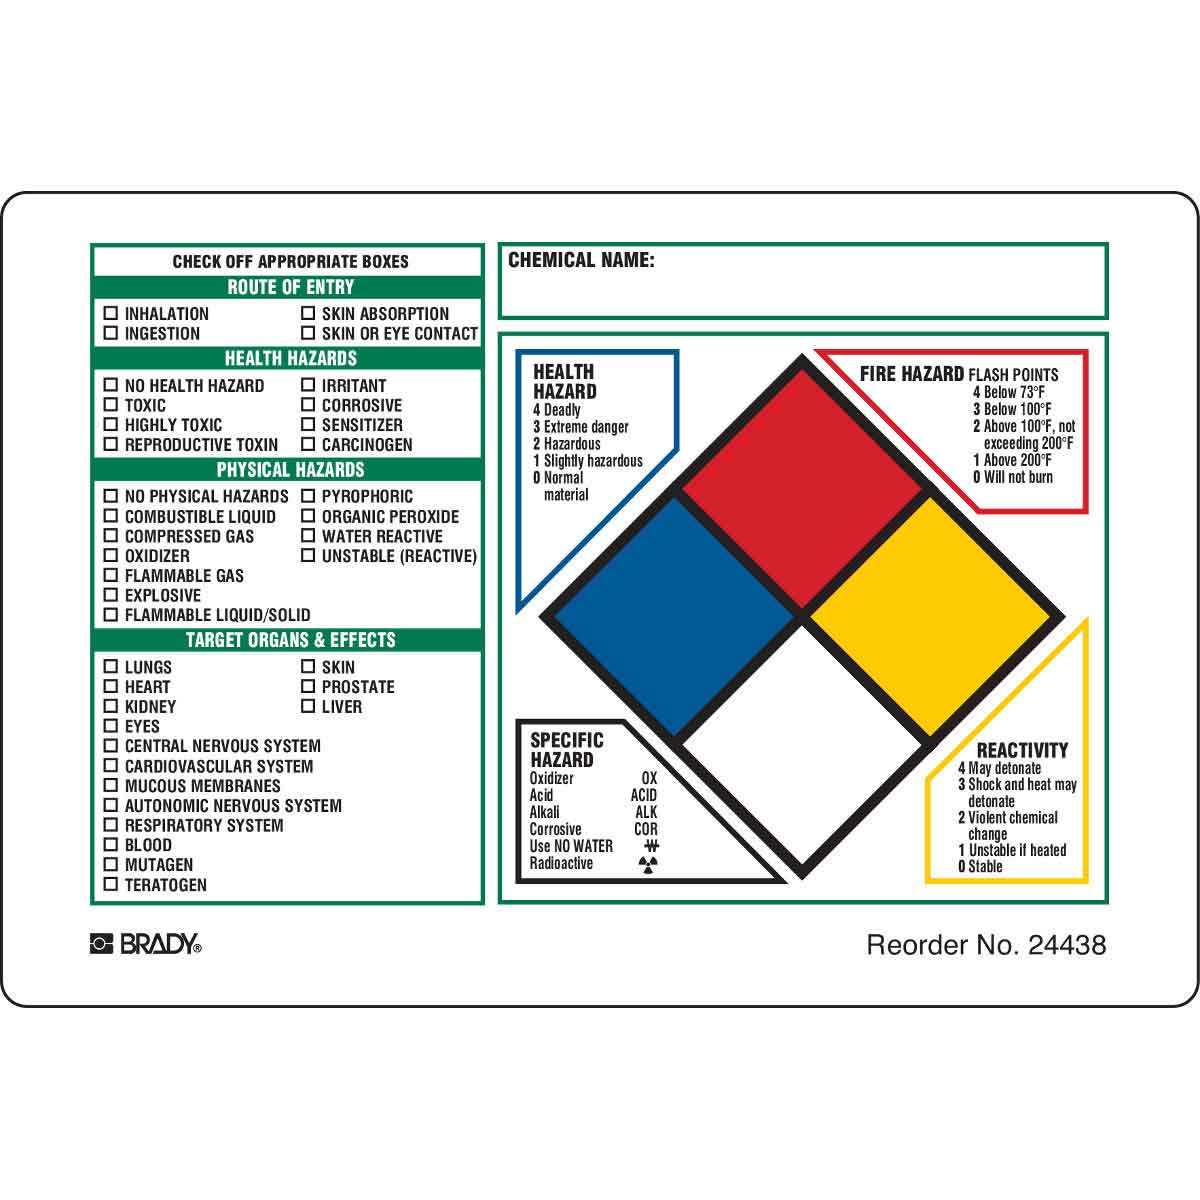 printable-nfpa-labels-tutore-org-master-of-documents